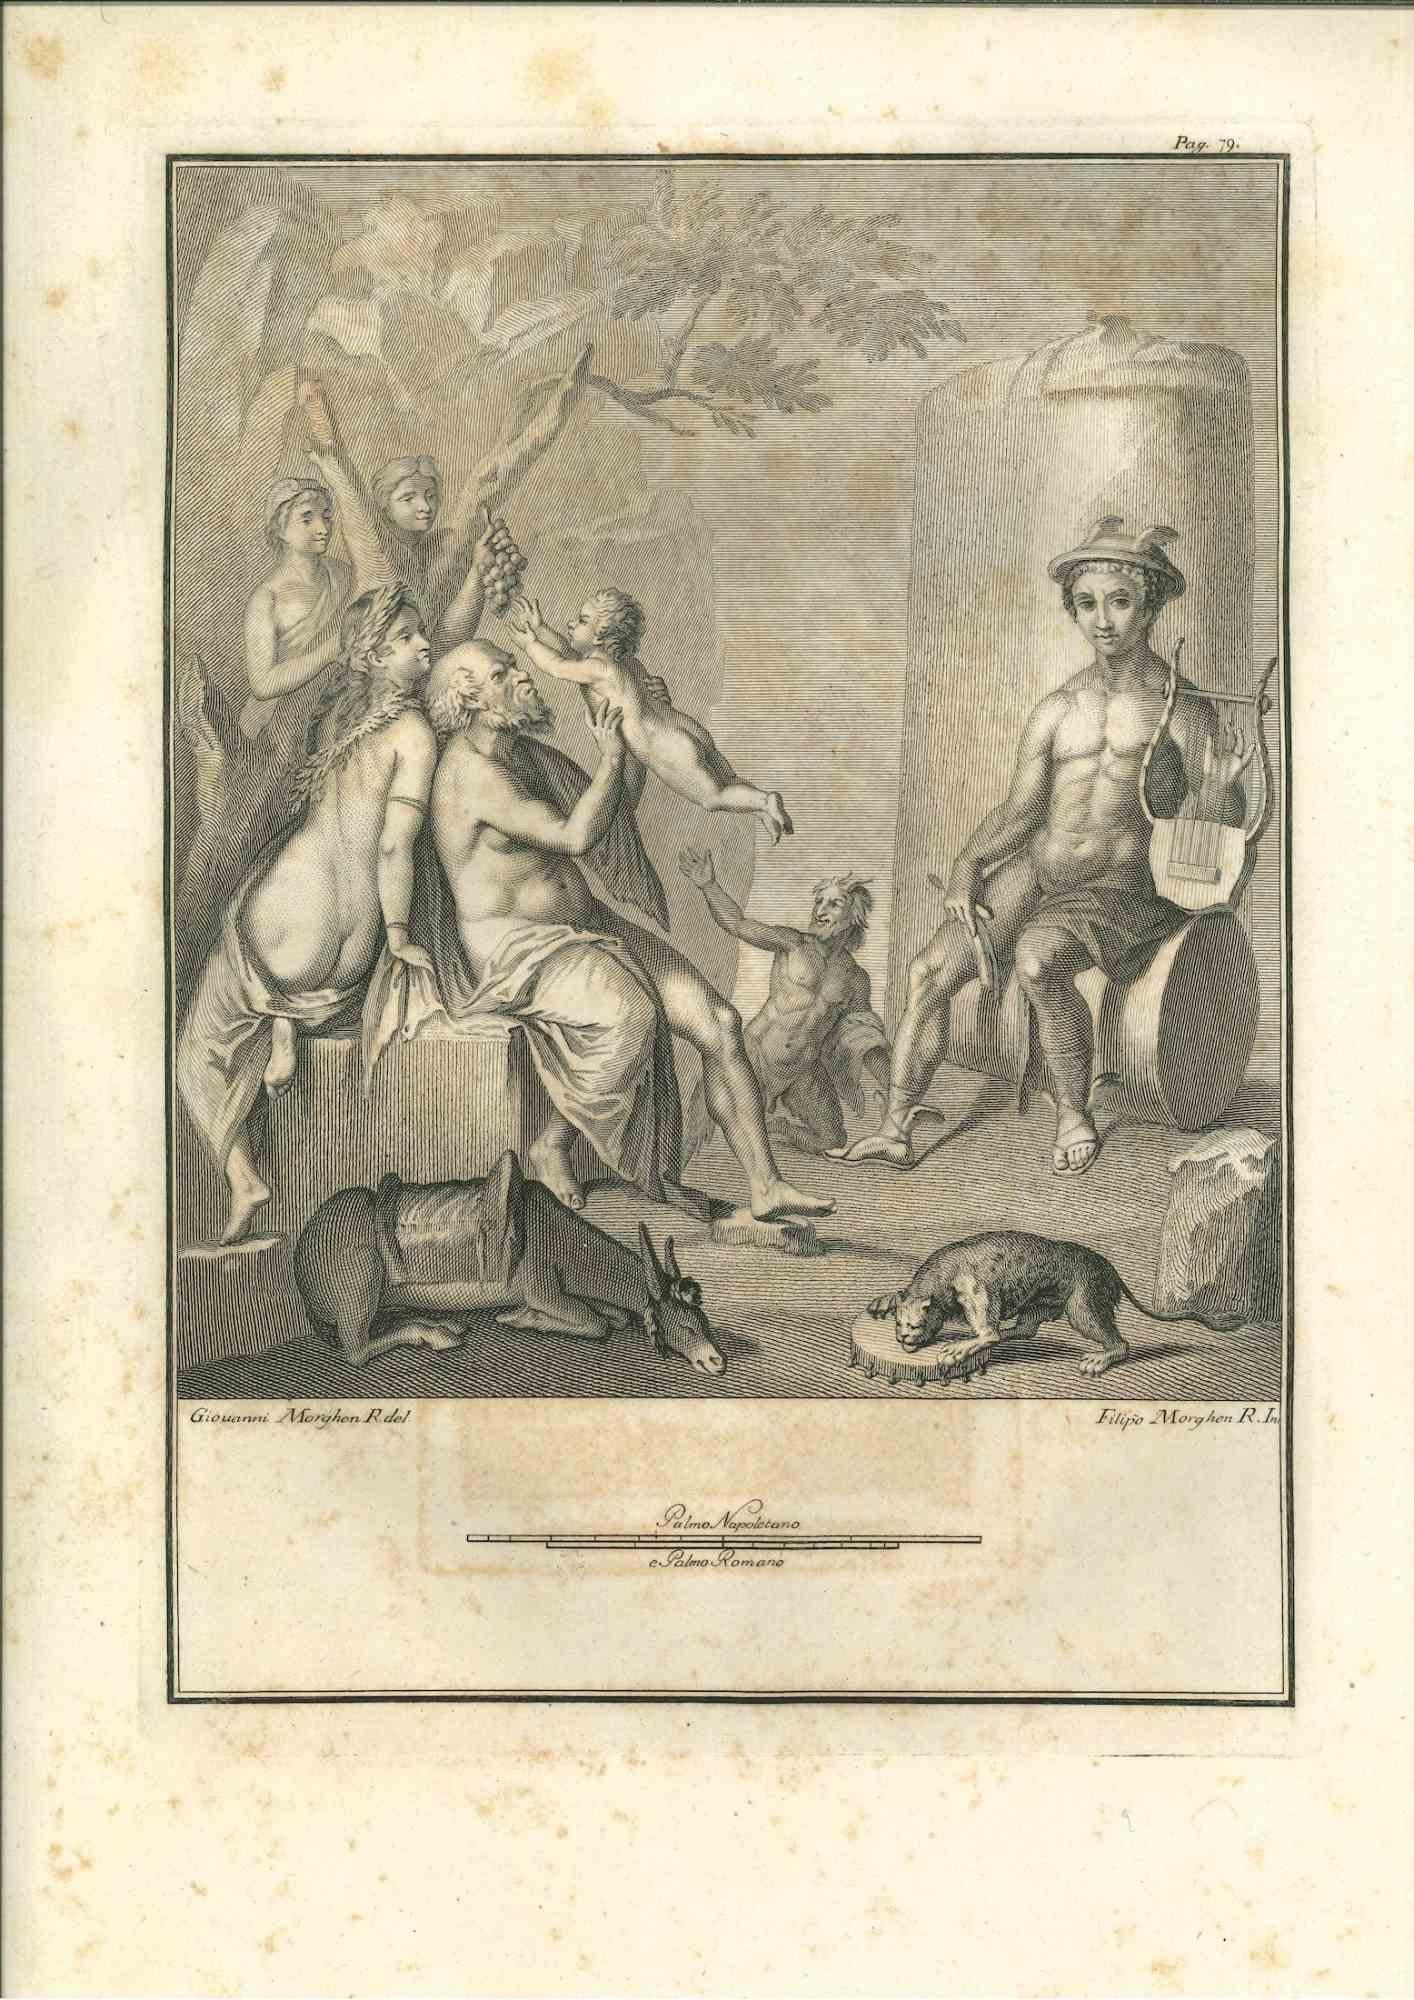 Ancient Roman Fresco from the series "Antiquities of Herculaneum", is an original etching on paper realized by Filippo Morghen in the 18th Century.

Signed on the plate.

Good conditions except for some stains.

The etching belongs to the print